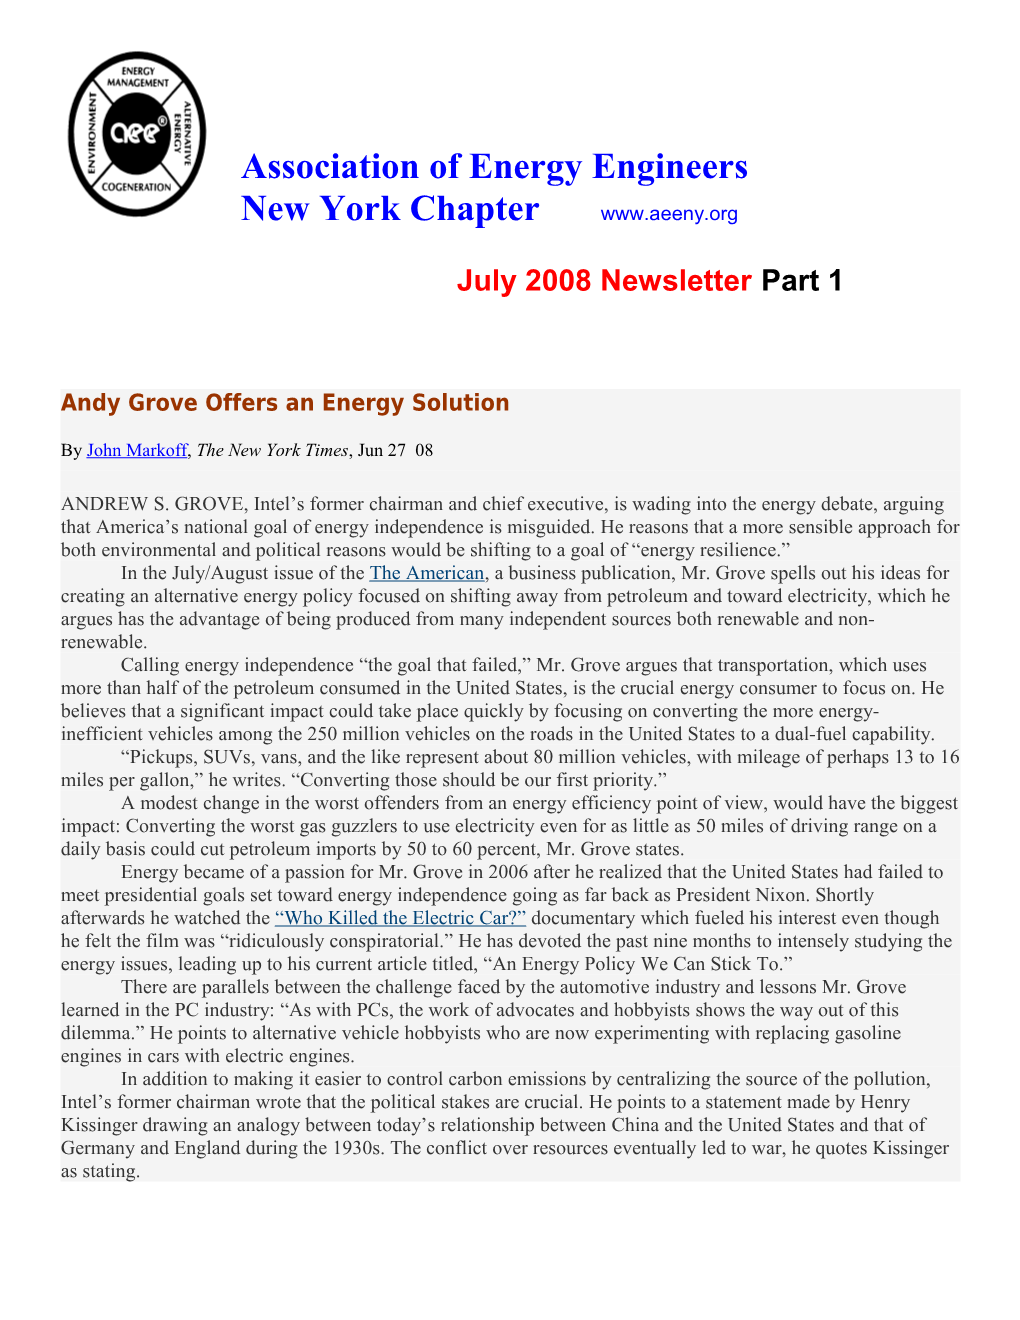 Andy Grove Offers an Energy Solution